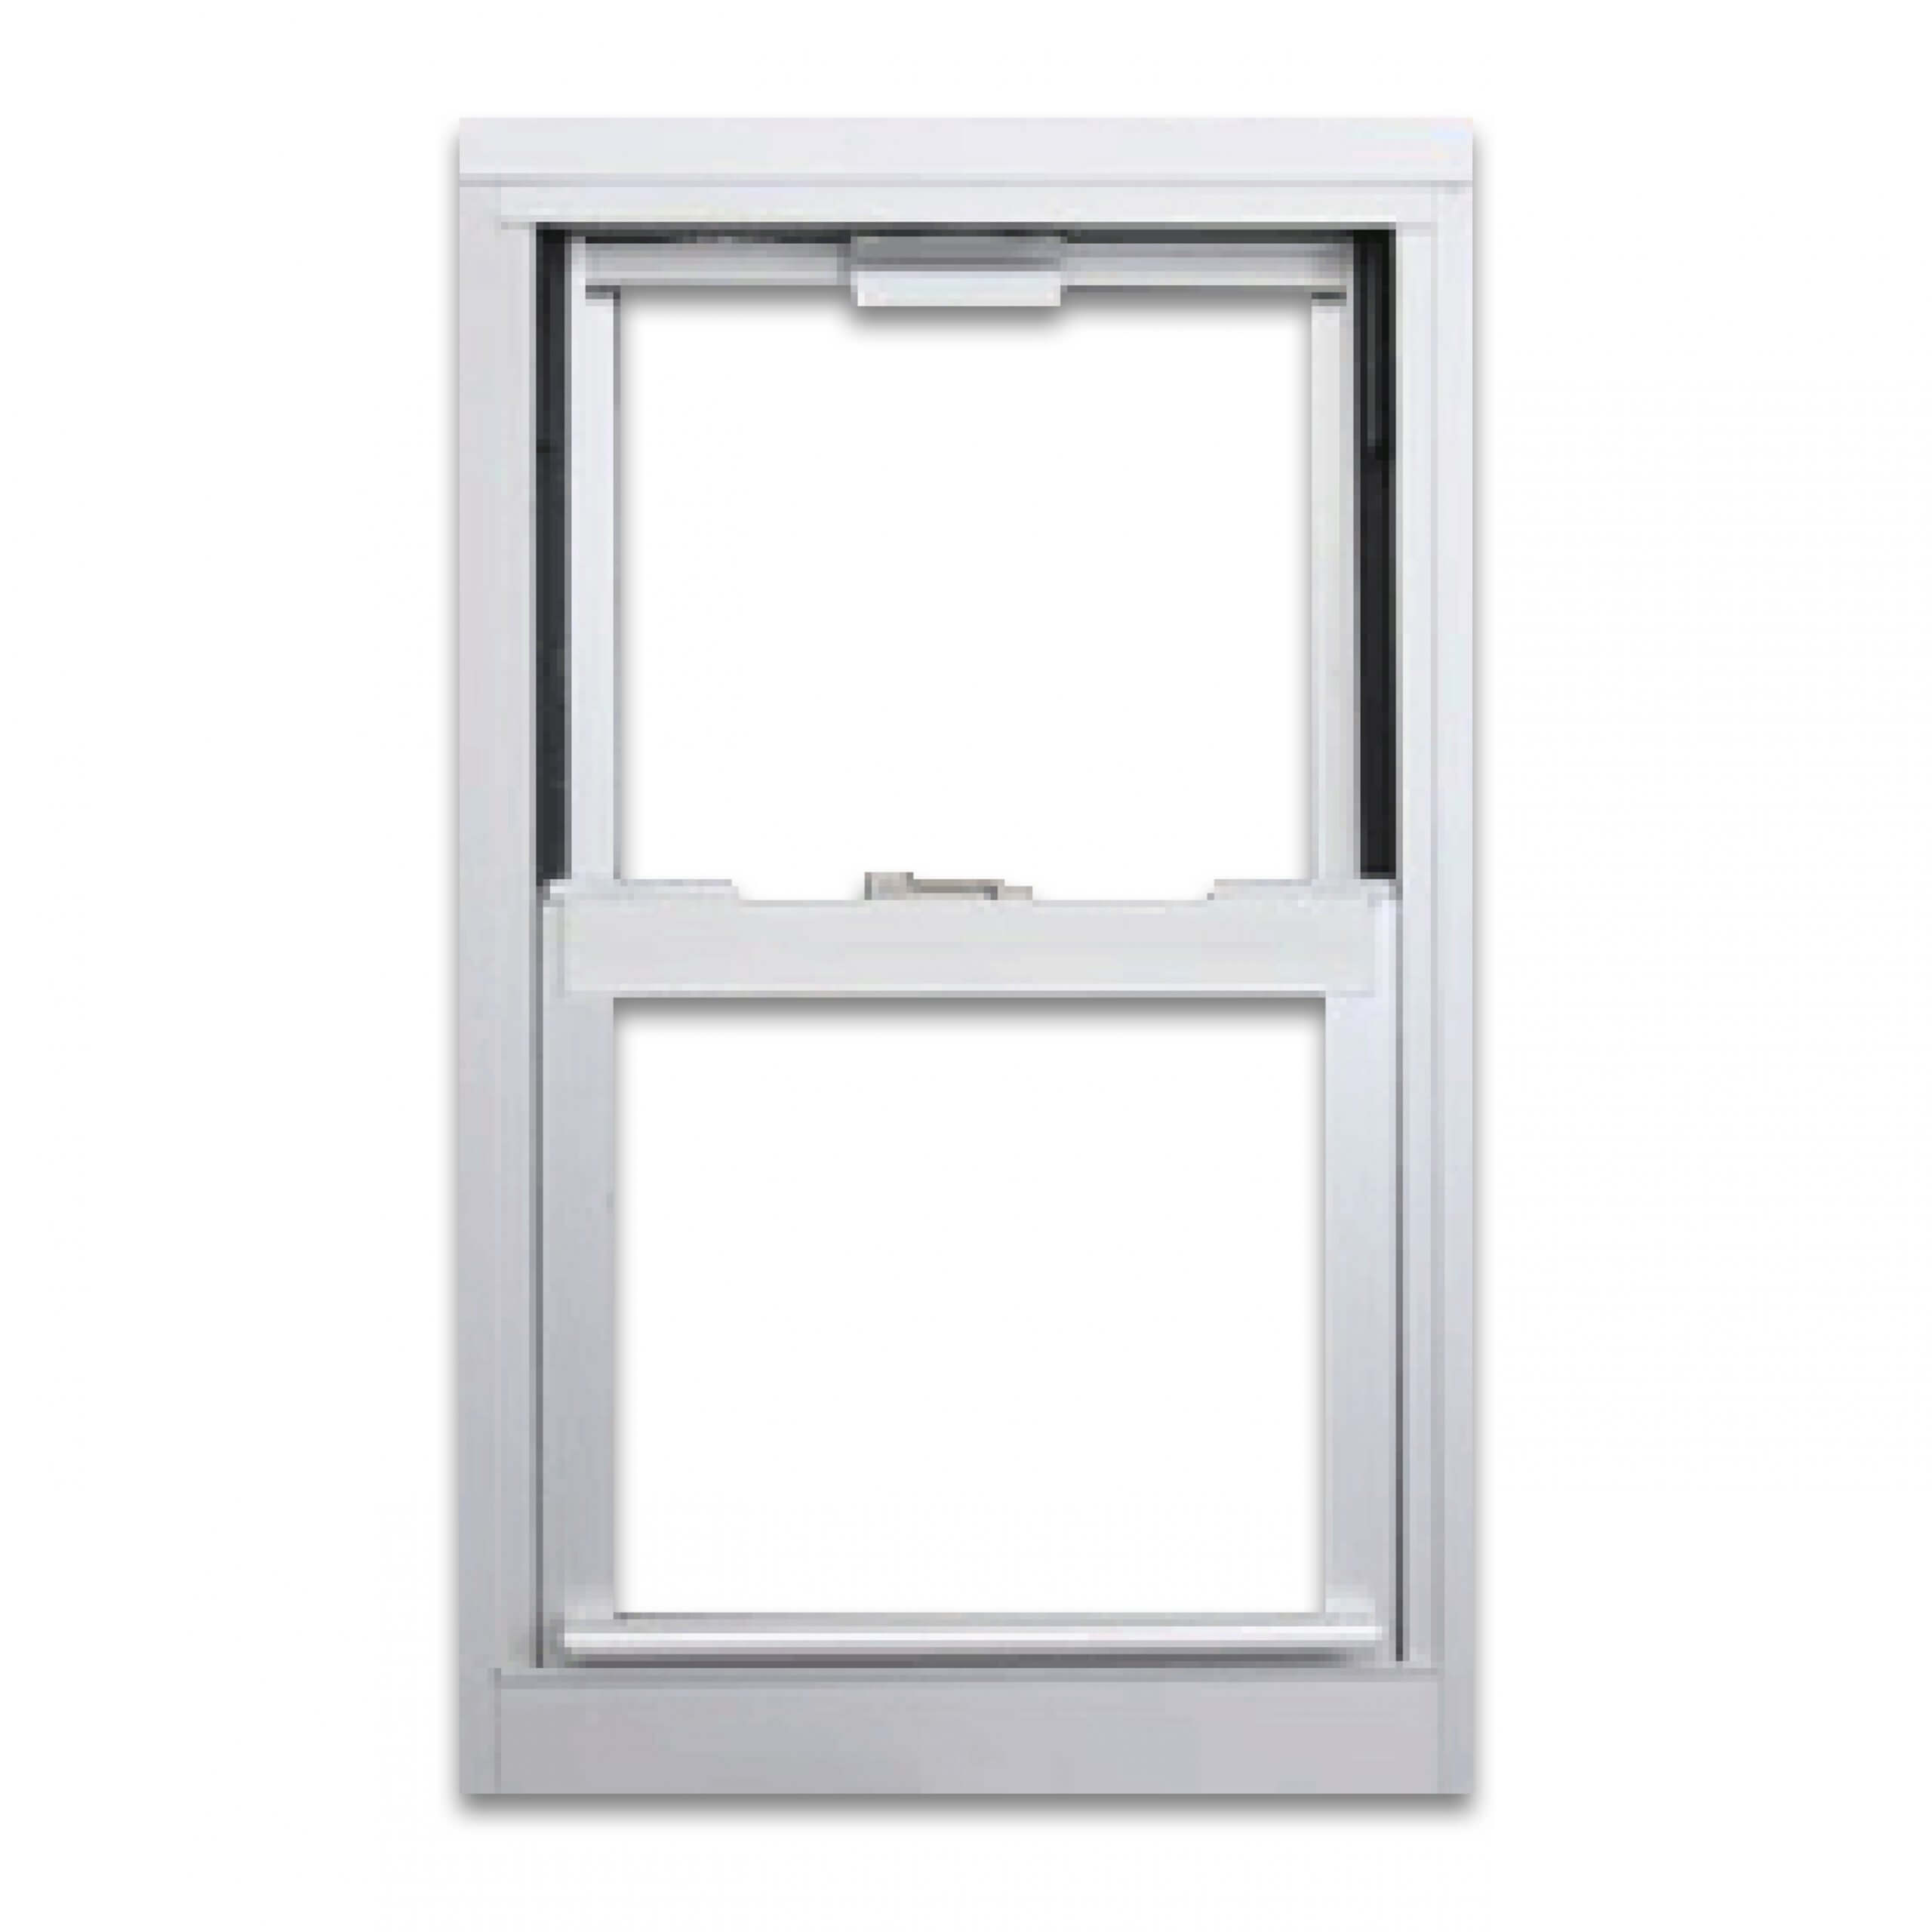 A150 Double Hung Window